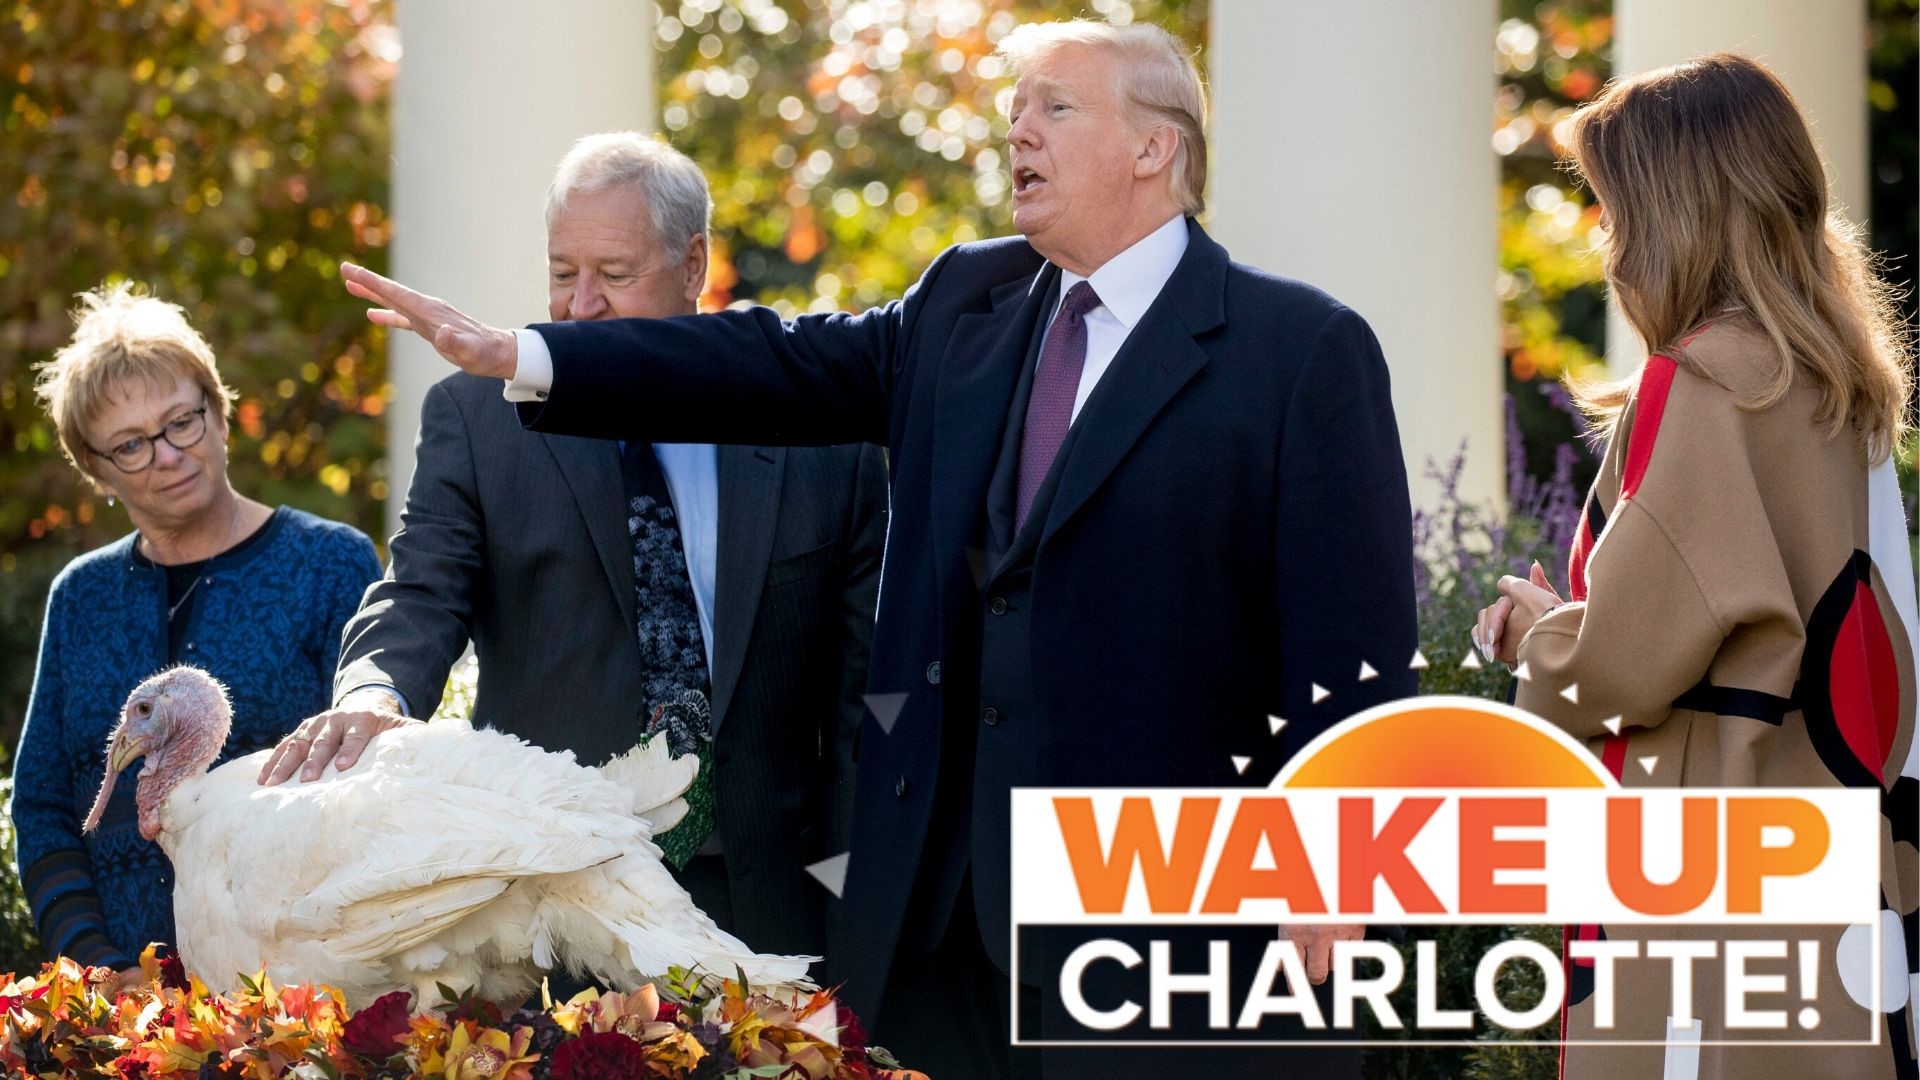 On Tuesday, President Donald Trump will give two turkeys another chance at life with the presidential pardon.